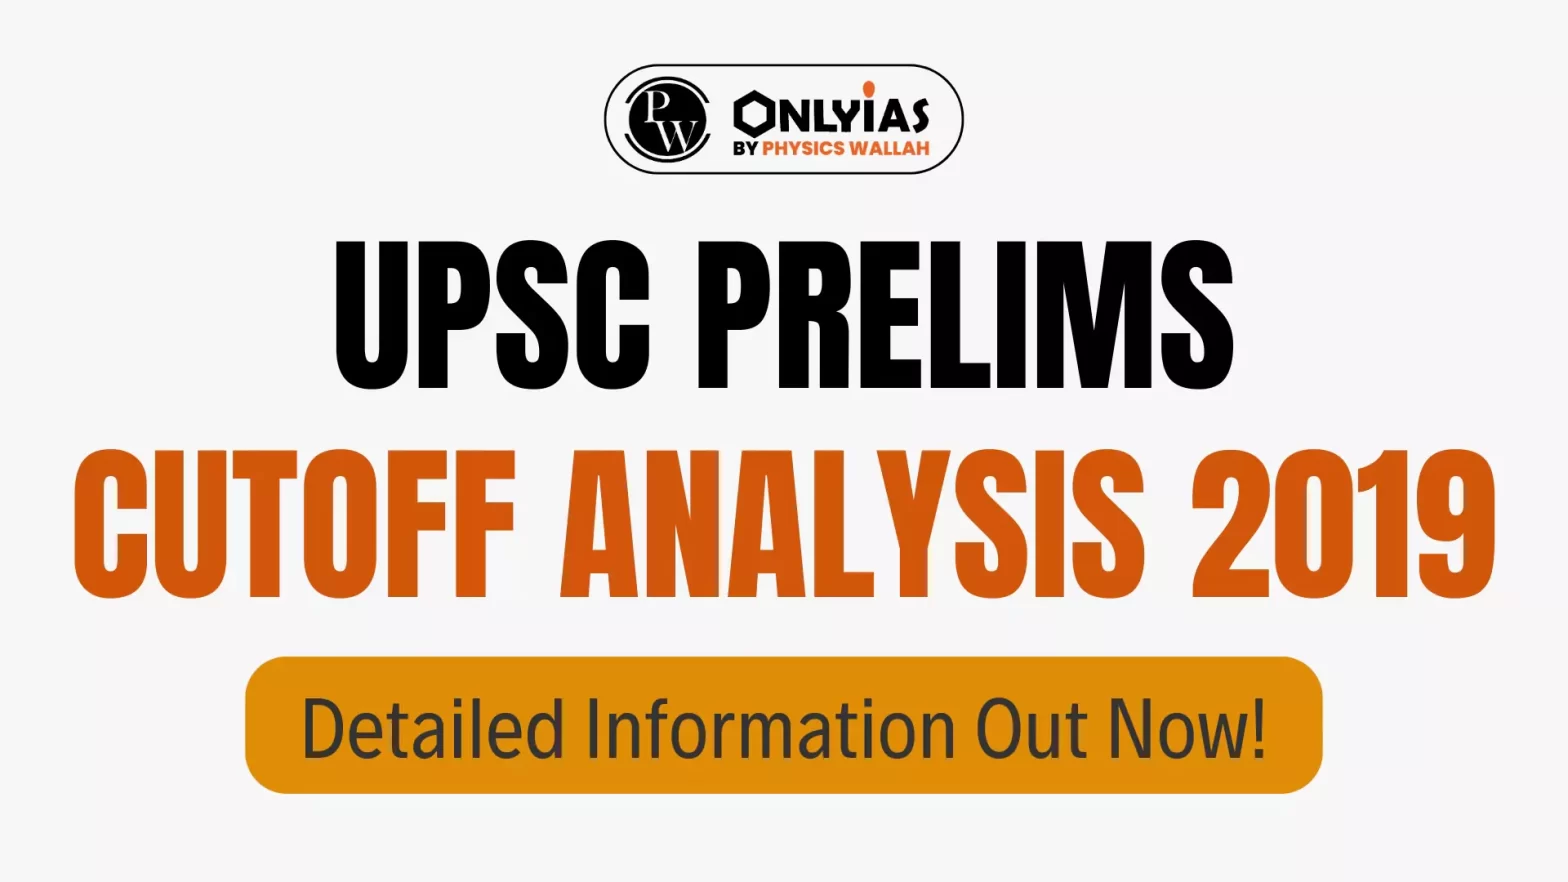 UPSC Prelims Cutoff Analysis 2019, Detailed Information Out Now!